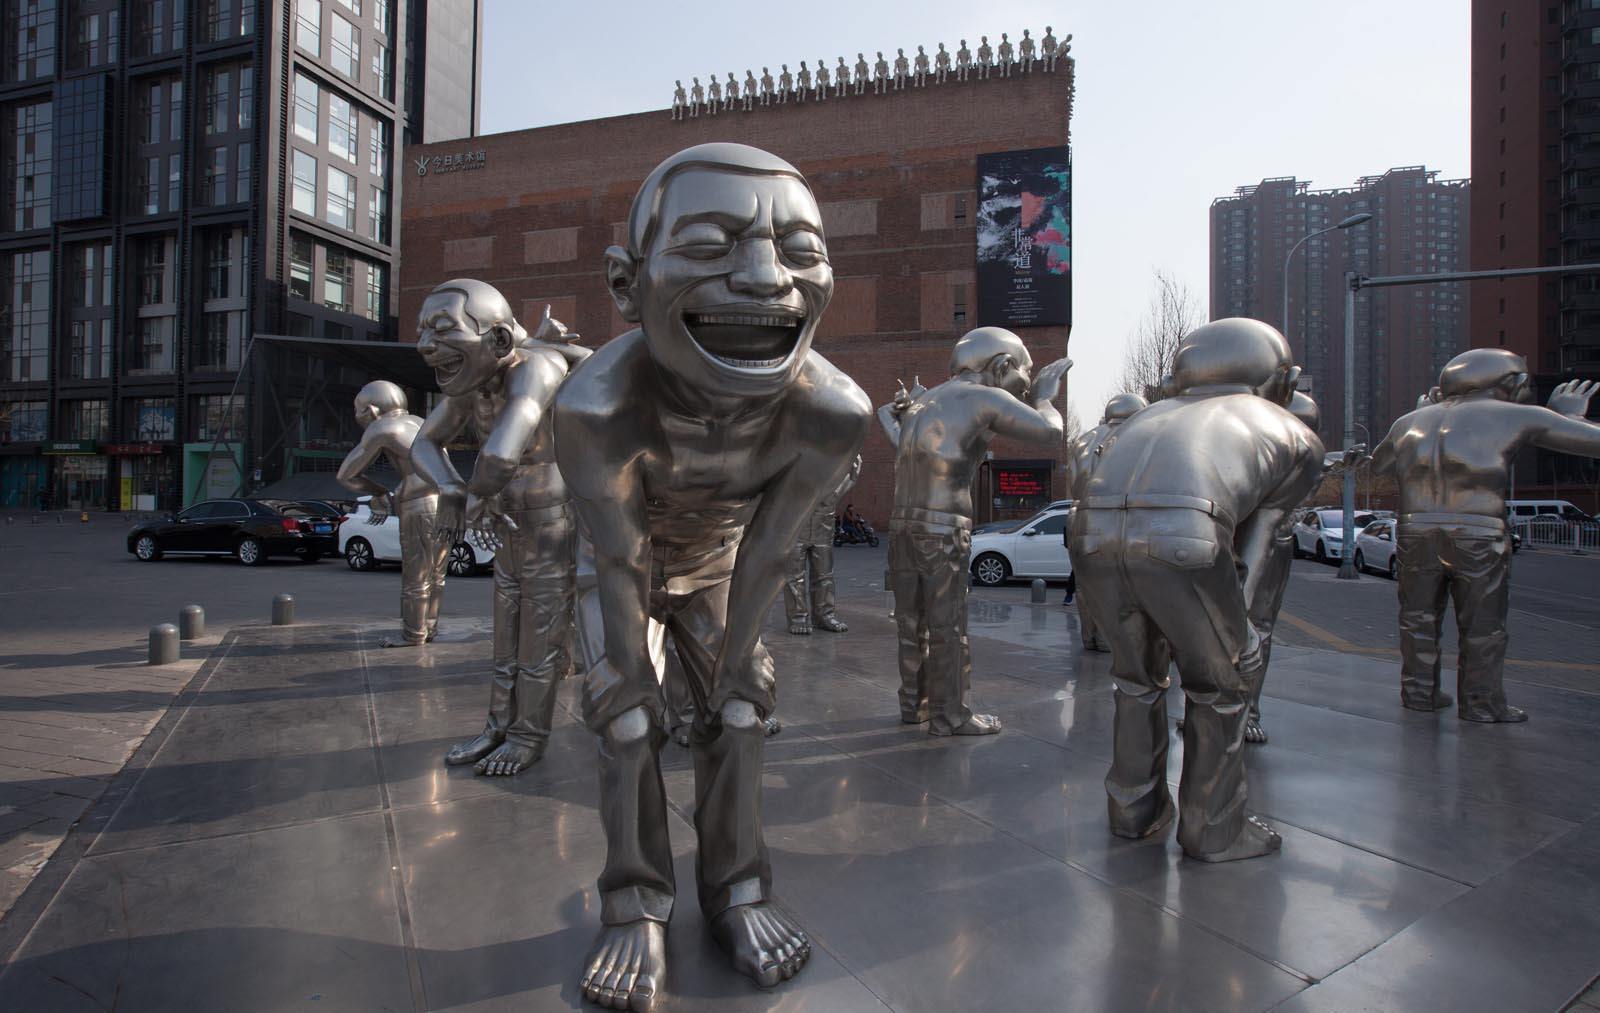 Neighbourhoods in Beijing include the 798 Art District, where you'll find the Today Art Museum